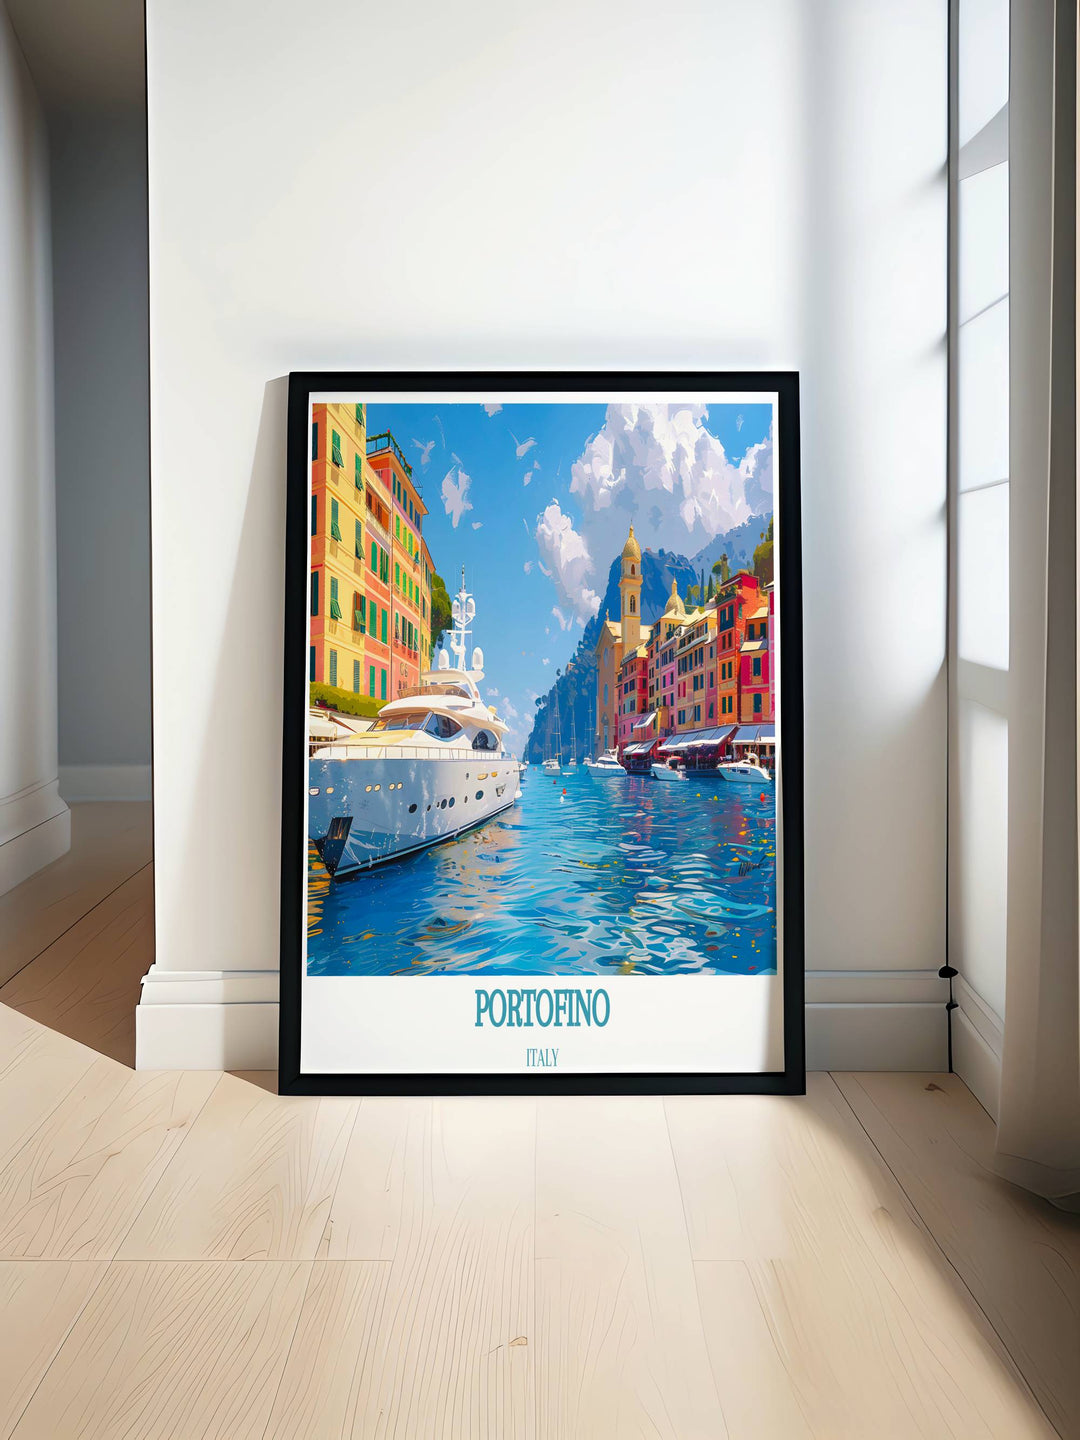 Portofino Gallery Wall Art showcasing the vibrant houses and serene harbor of this picturesque Italian village, capturing the essence of the Italian Riviera.